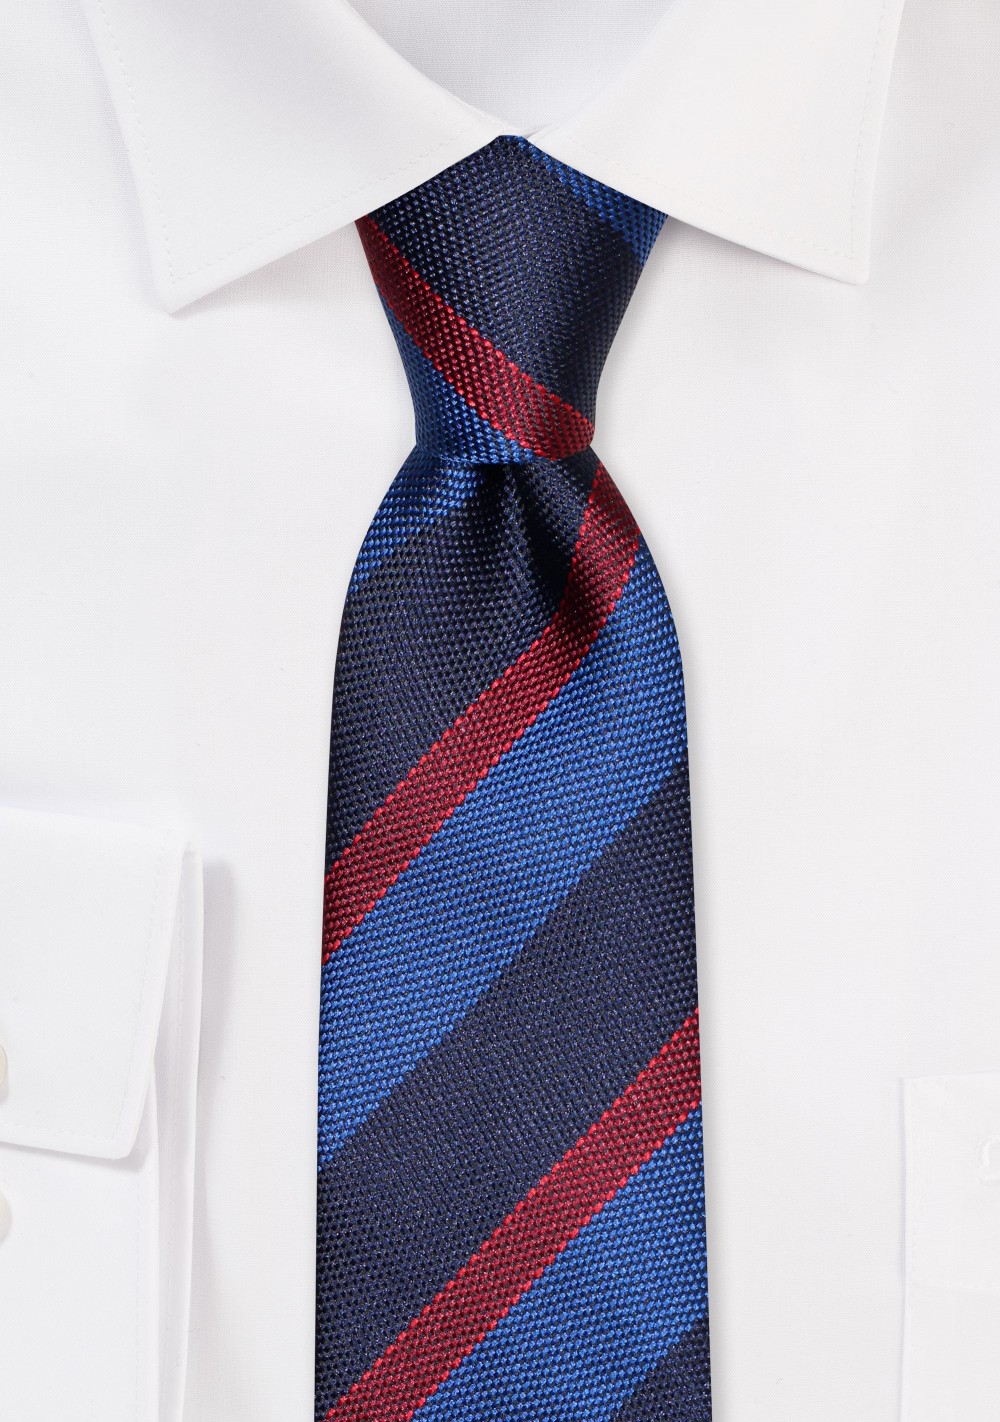 Grenadine Textured Striped Skinny Tie in Blue and Cherry